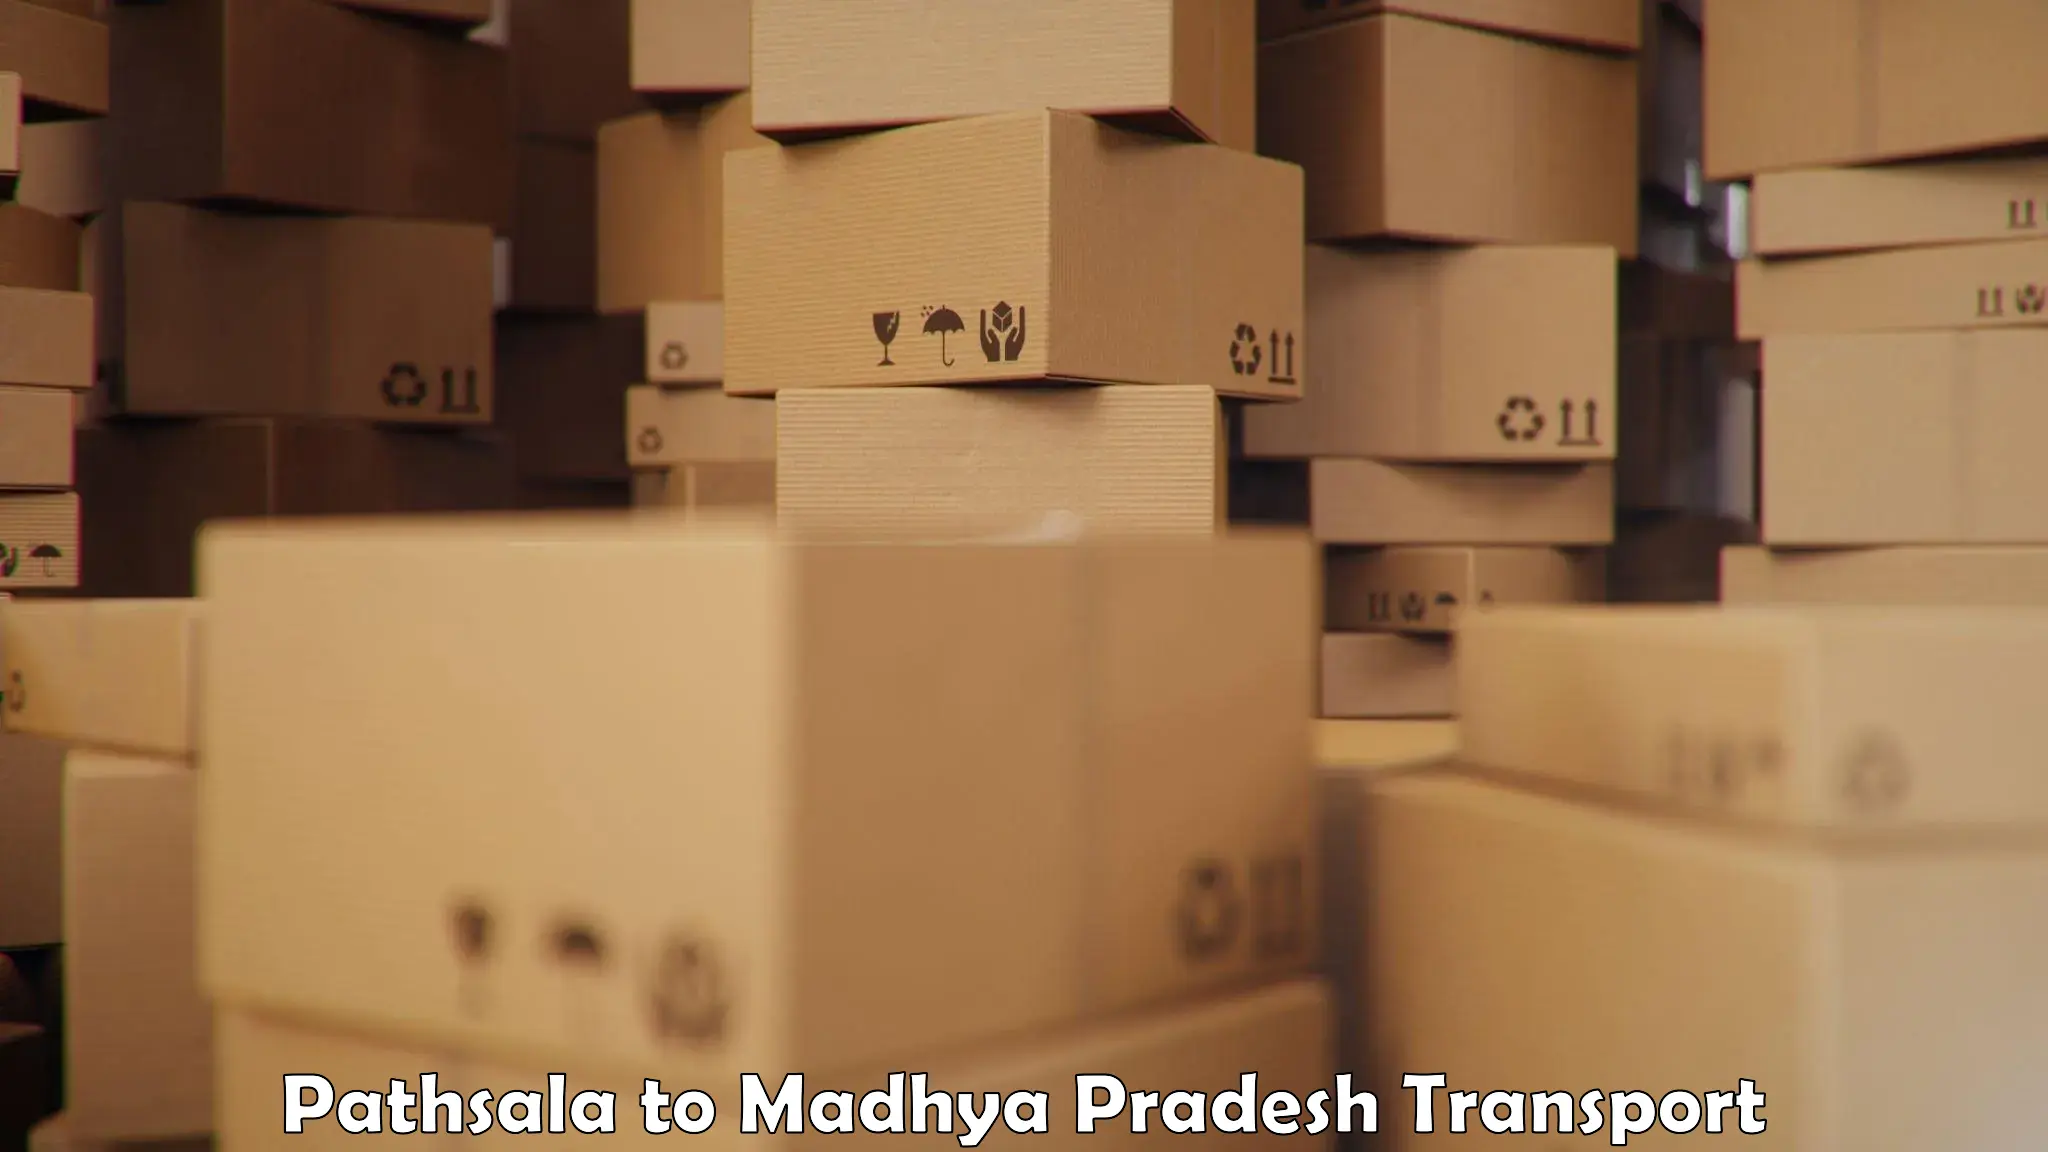 Cargo transport services in Pathsala to Madwas